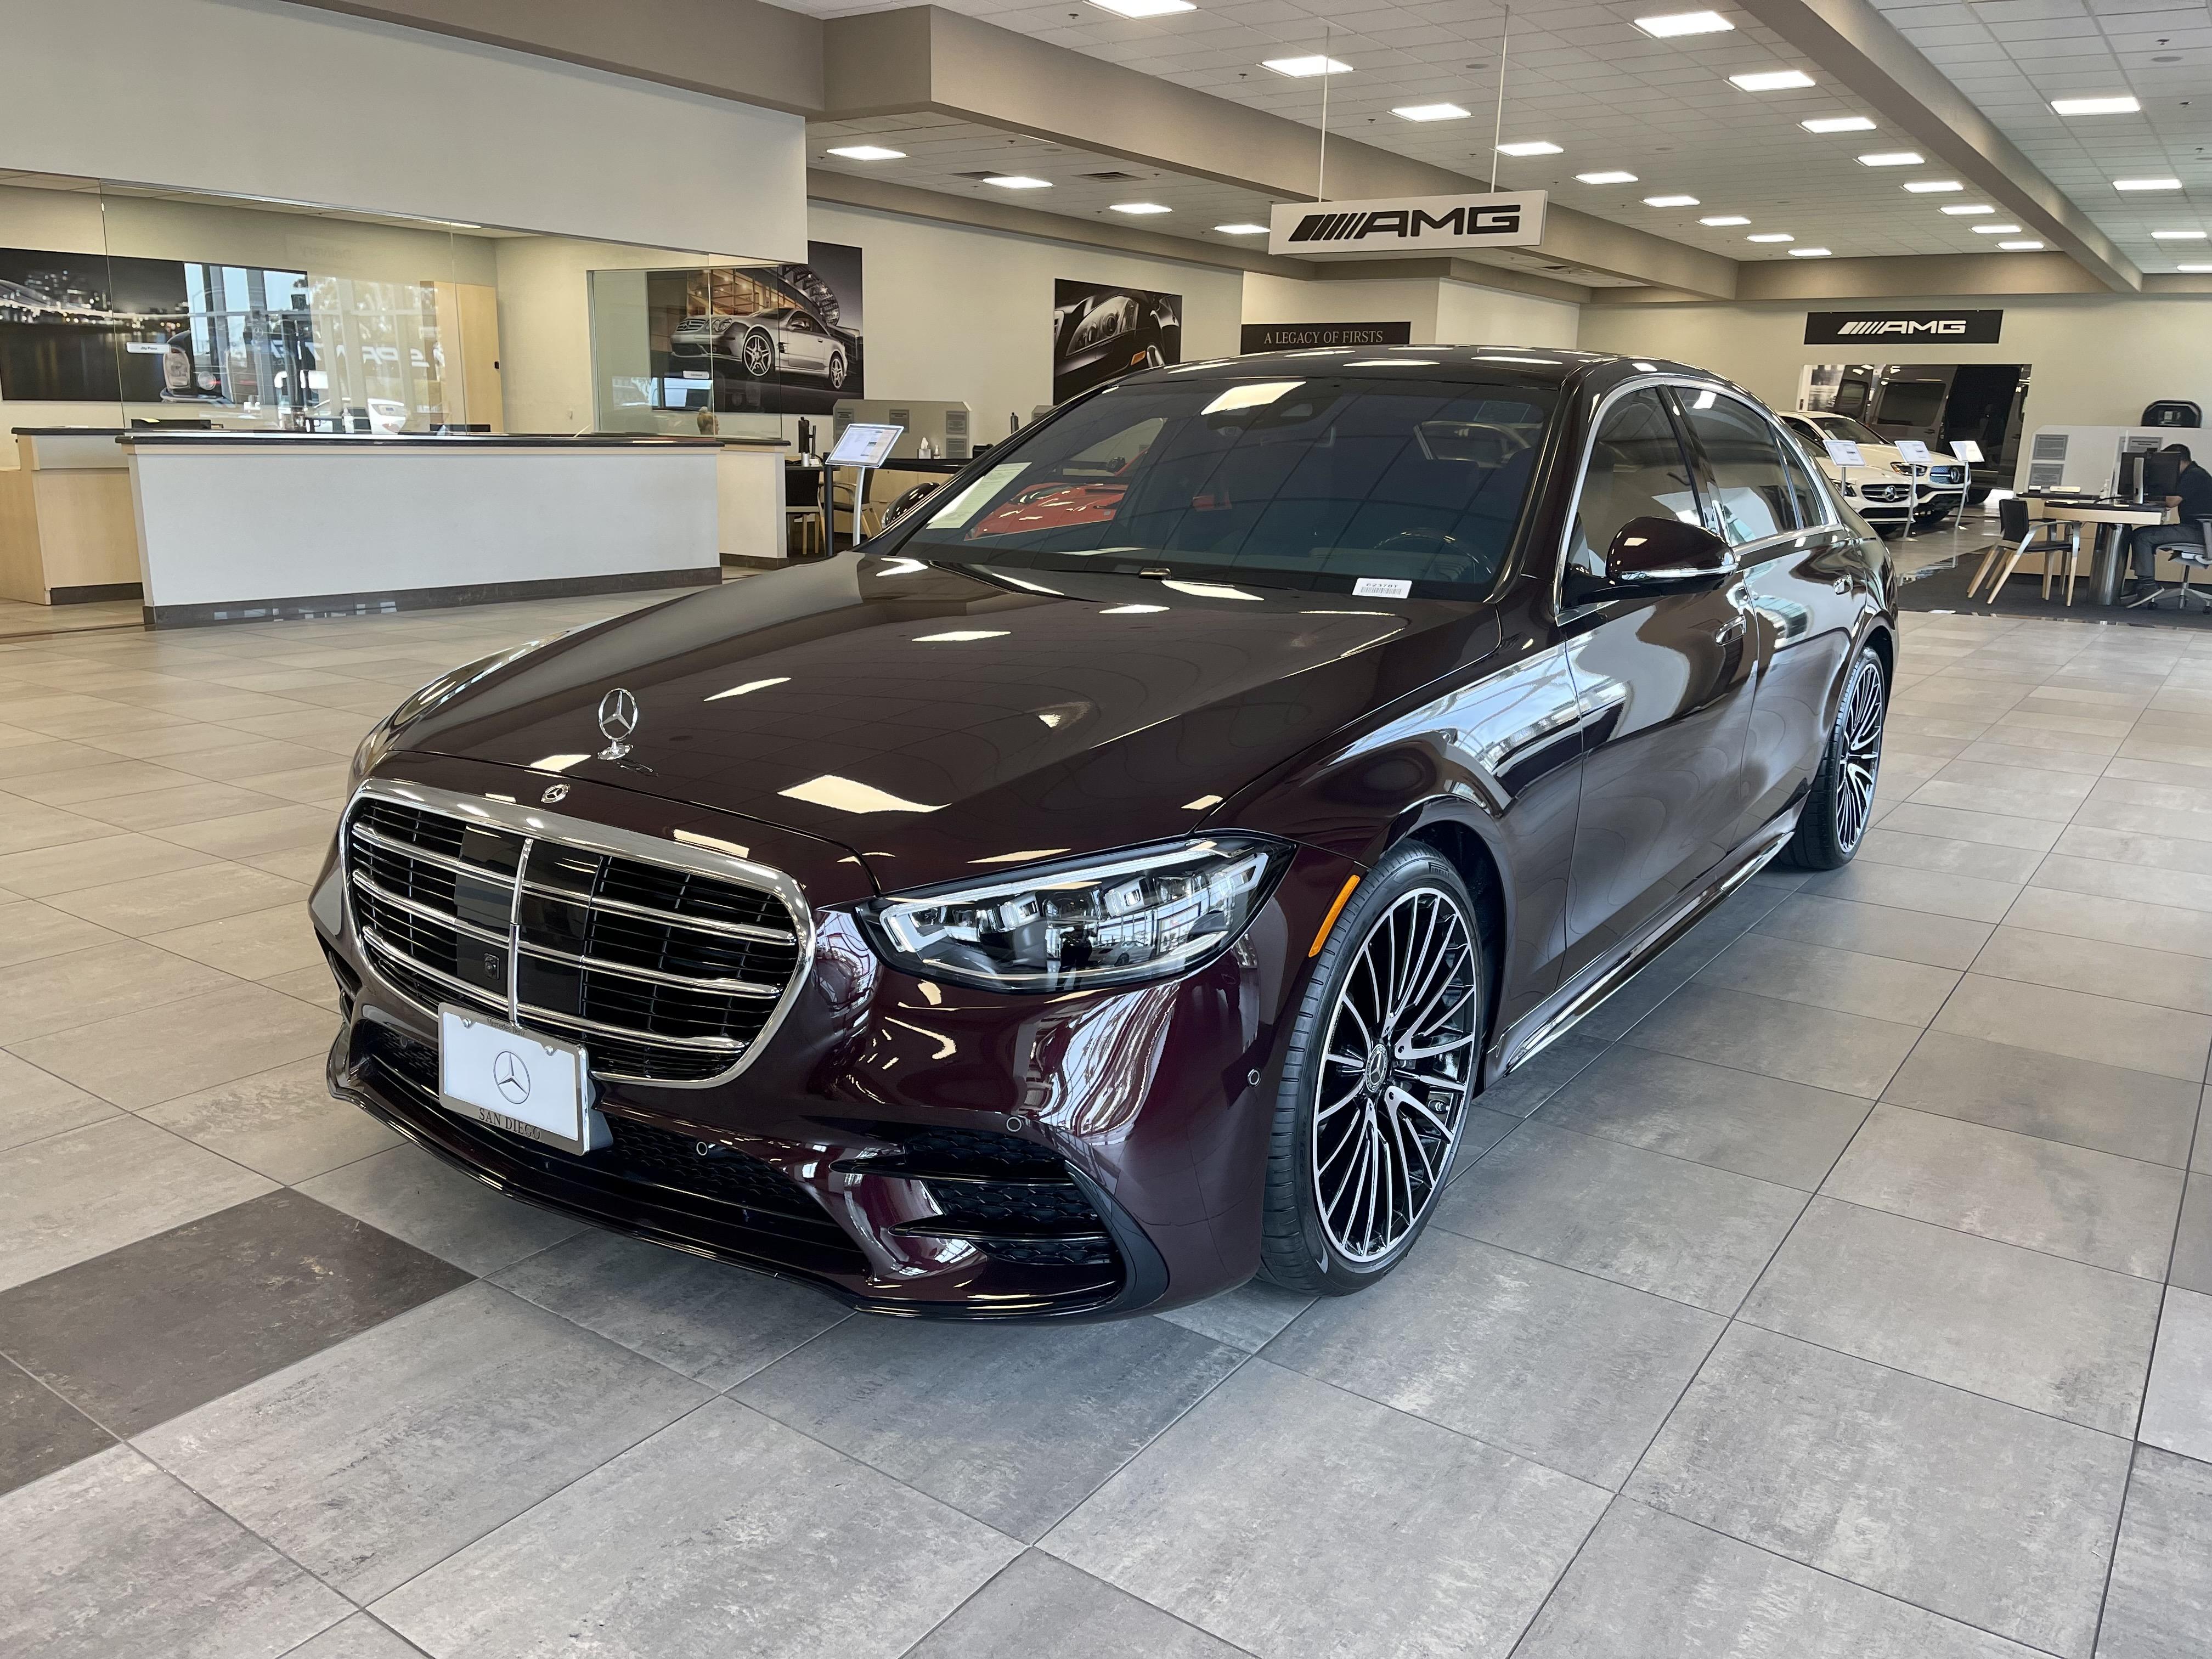 Atlas skorsten modtagende Mercedes-Benz of San Diego on Twitter: "Now available, this 2021 Mercedes- Benz S 580 in Rubellite Red Metallic. Stop by today to see this beautiful  color in person! #MercedesBenzOfSanDiego #MercedesBenzS580  https://t.co/SBLEjeFgT0" / Twitter